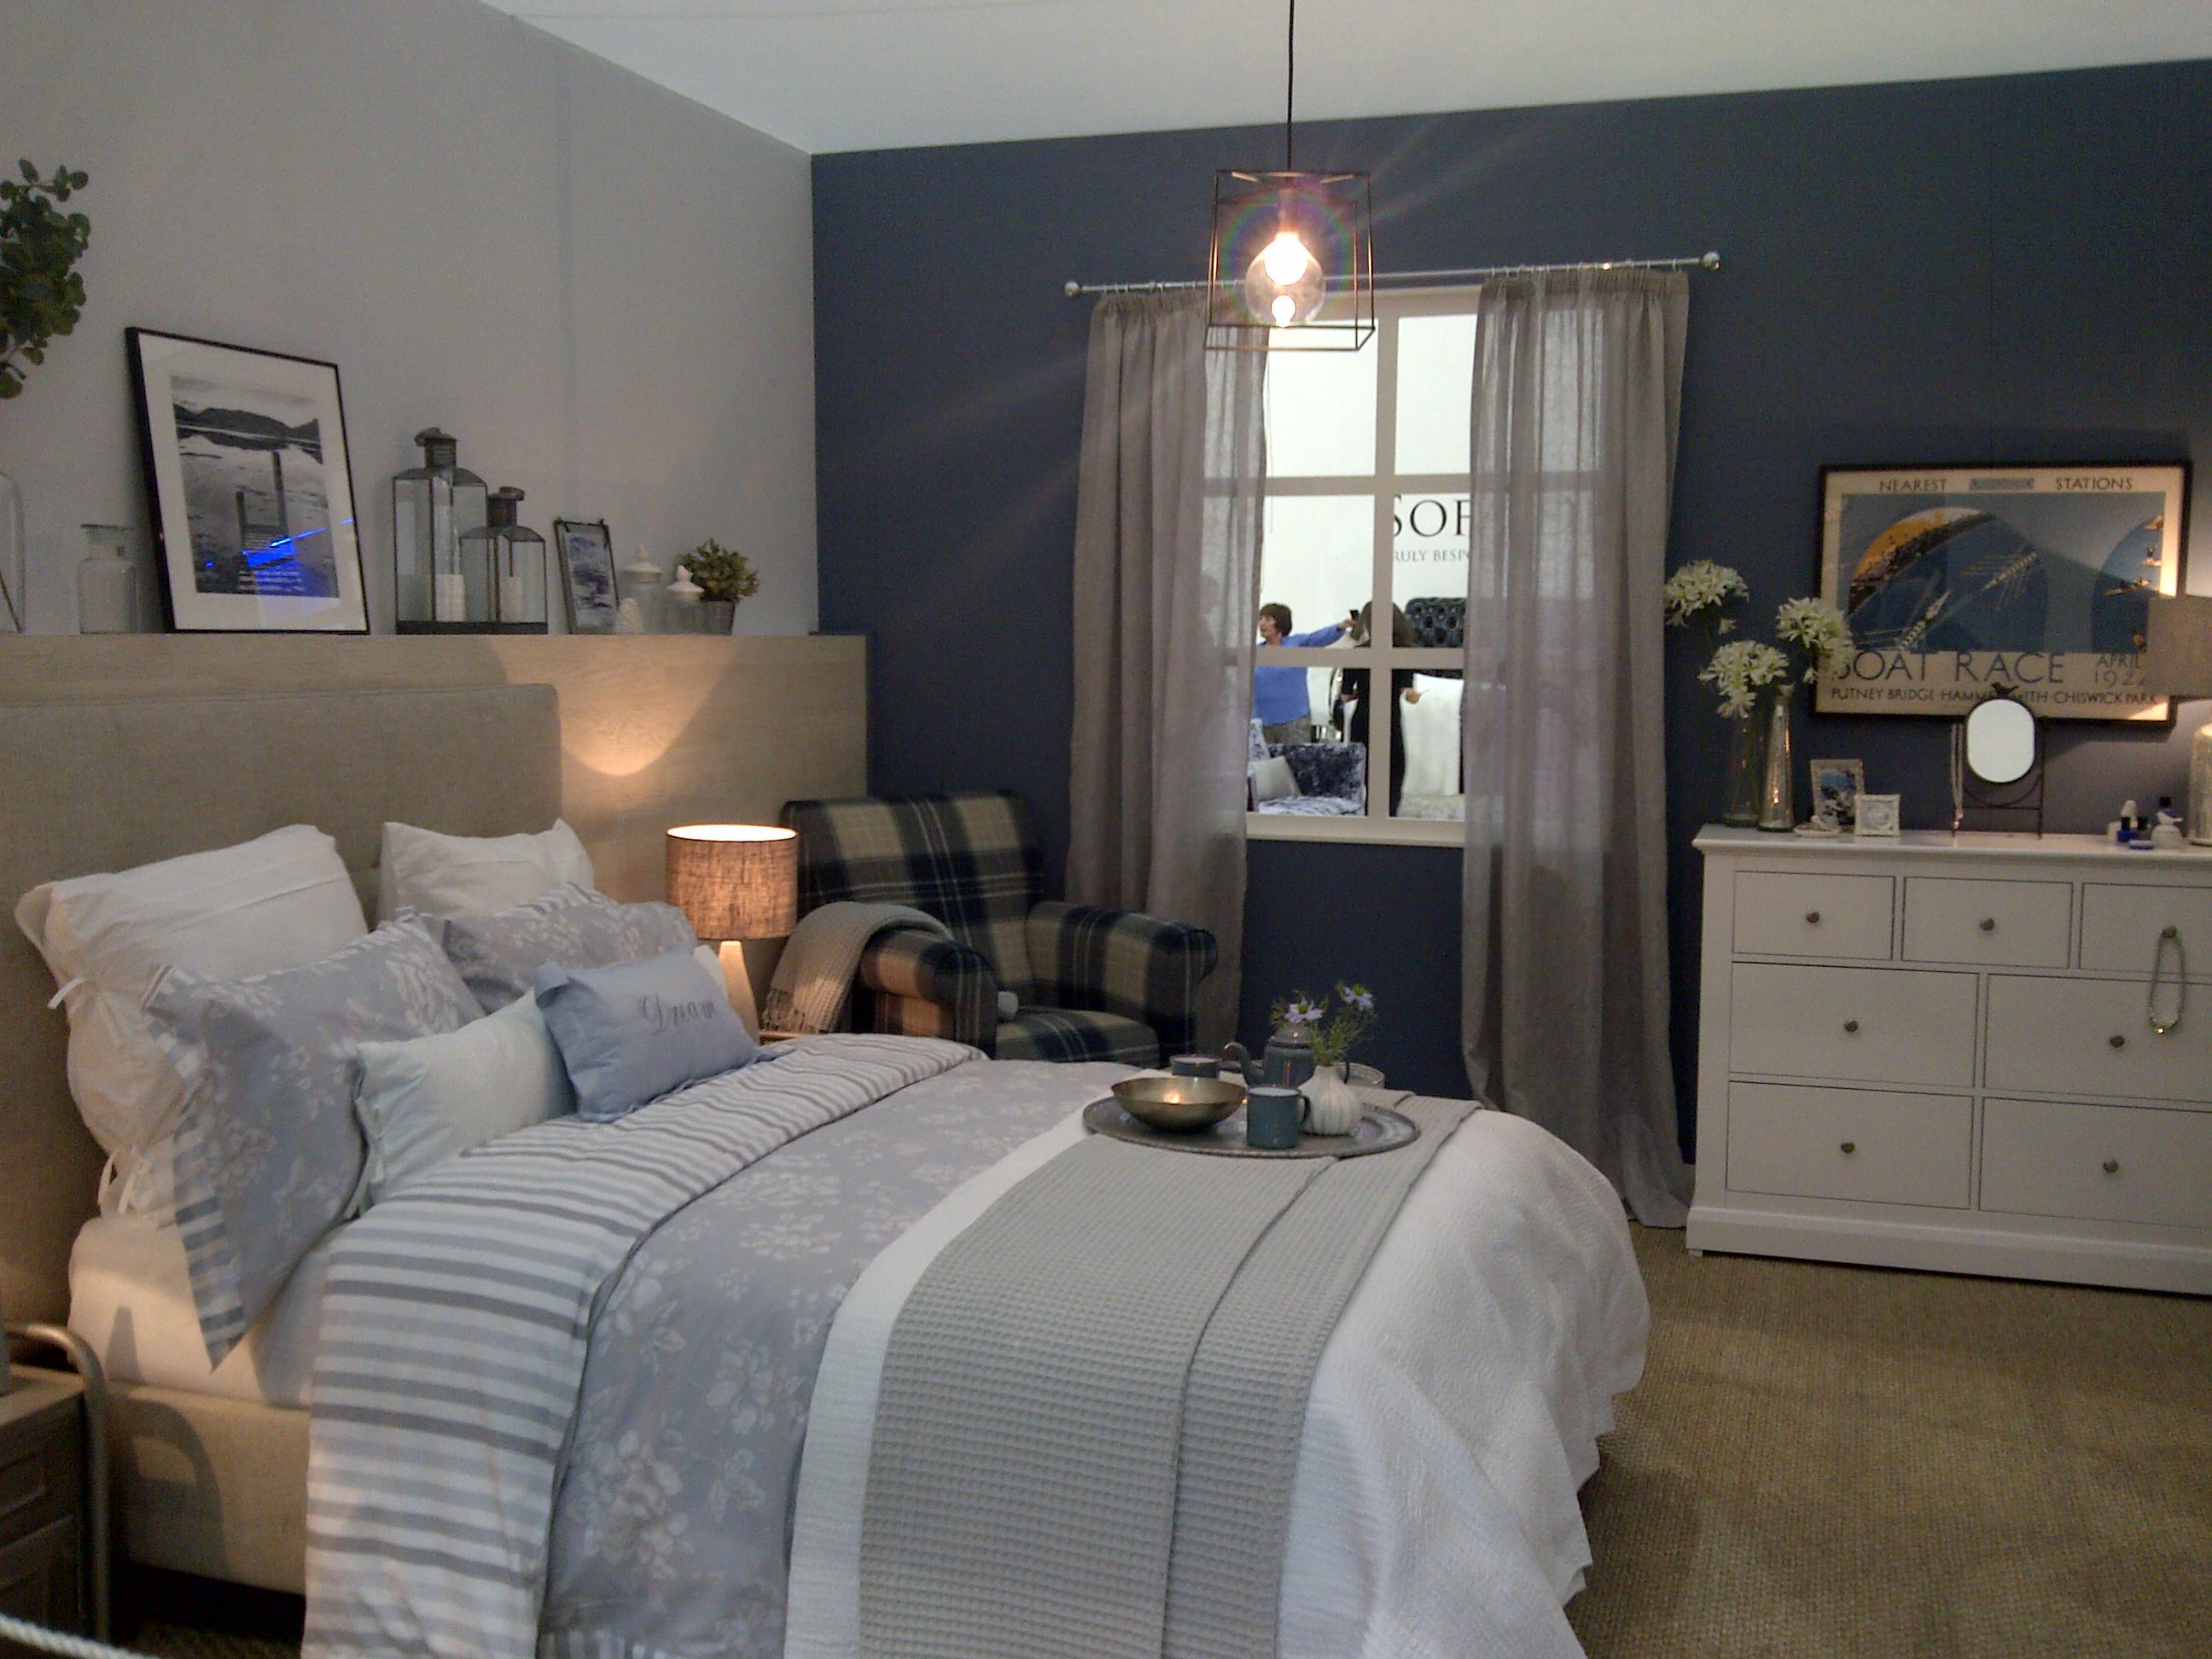 My dream bedroom! Grey can be a very boring colour but in the right shades can look beautiful & sophisicated.